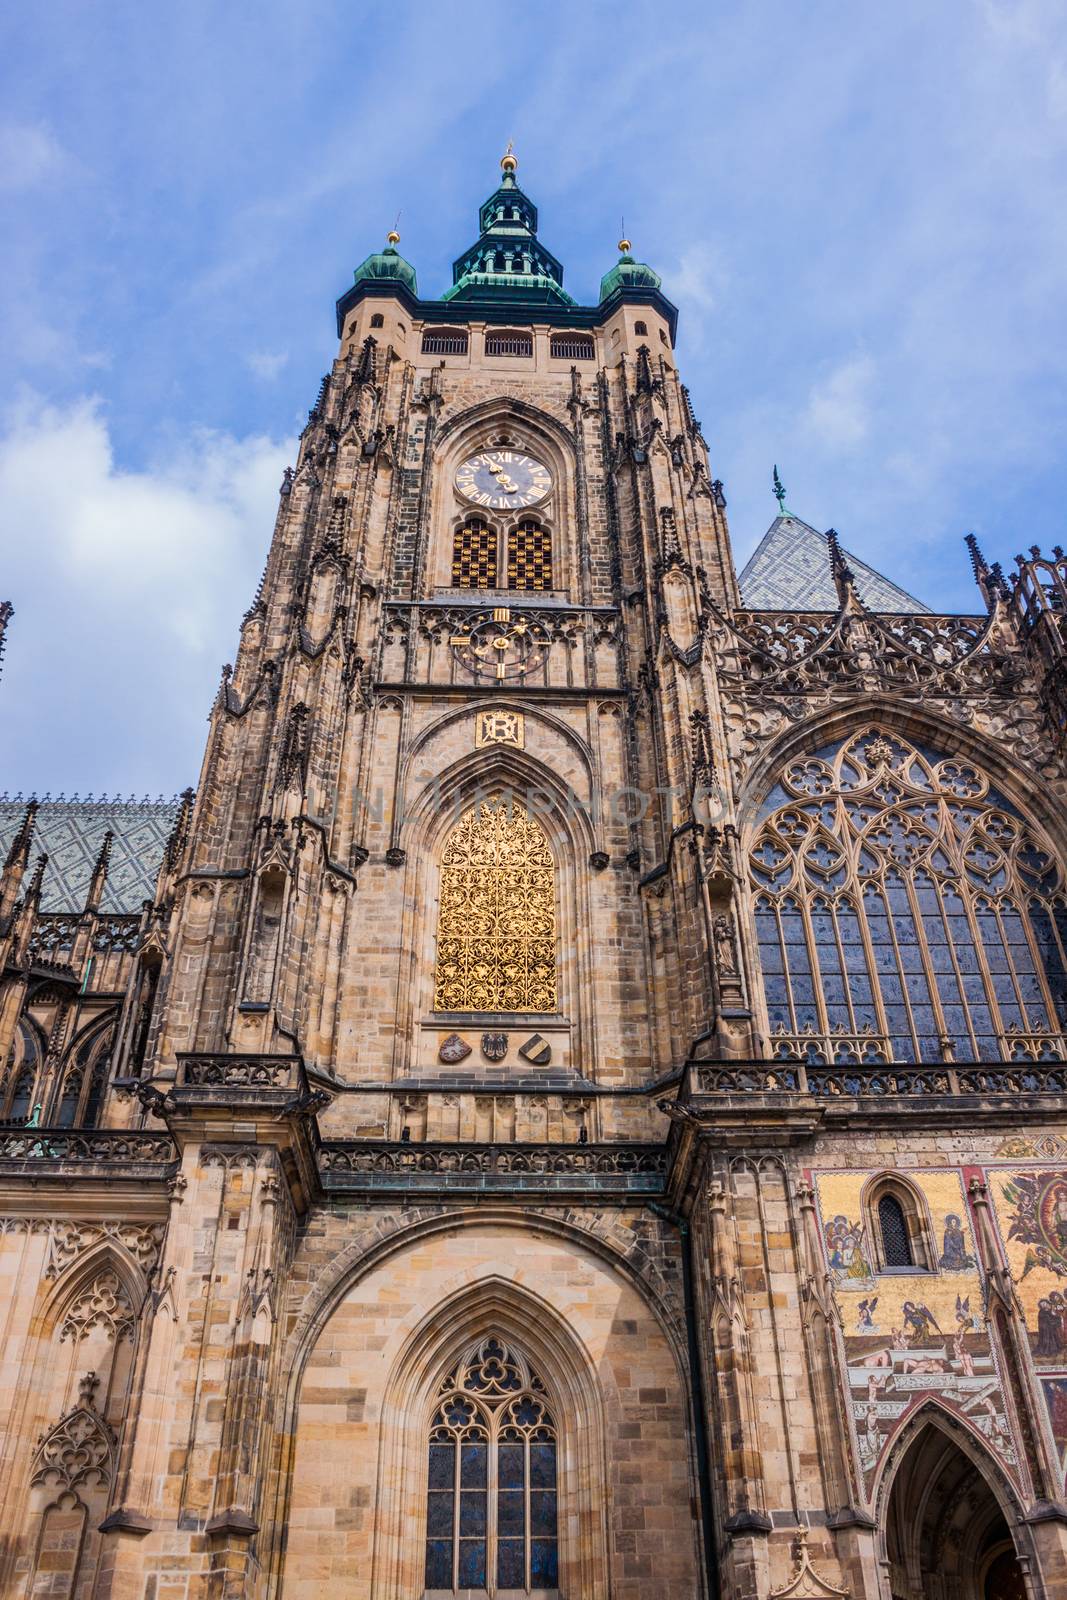 The west facade of St. Vitus Cathedral in Prague (Czech Republic by bloodua